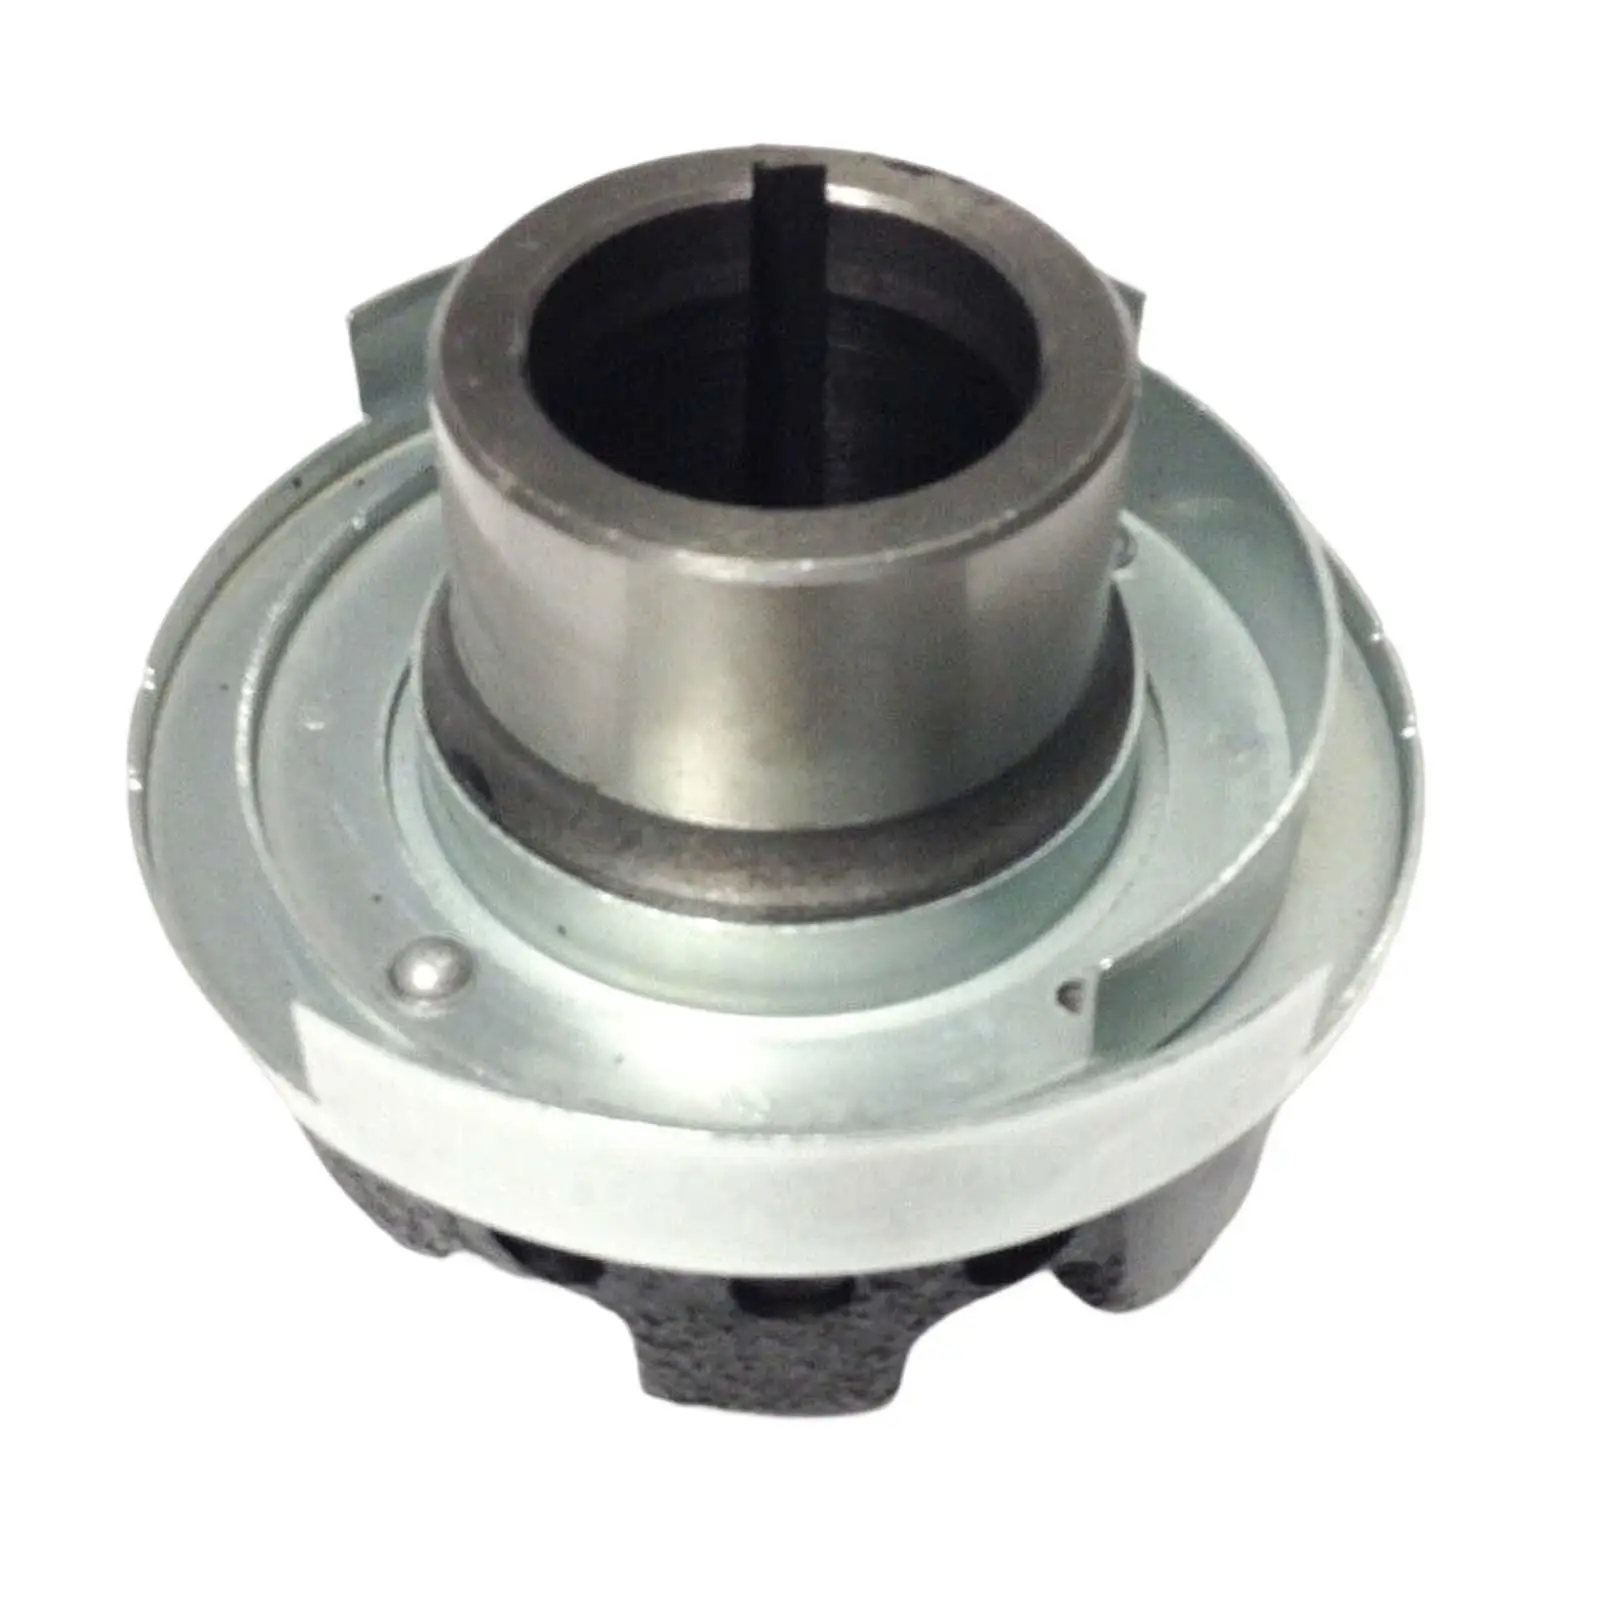 Harmonic Balancer Crankshaft Hub F1zz6C377A Metal Durable Replace Parts Easy Installation for Ford Mustang 2.3L 4 cyl